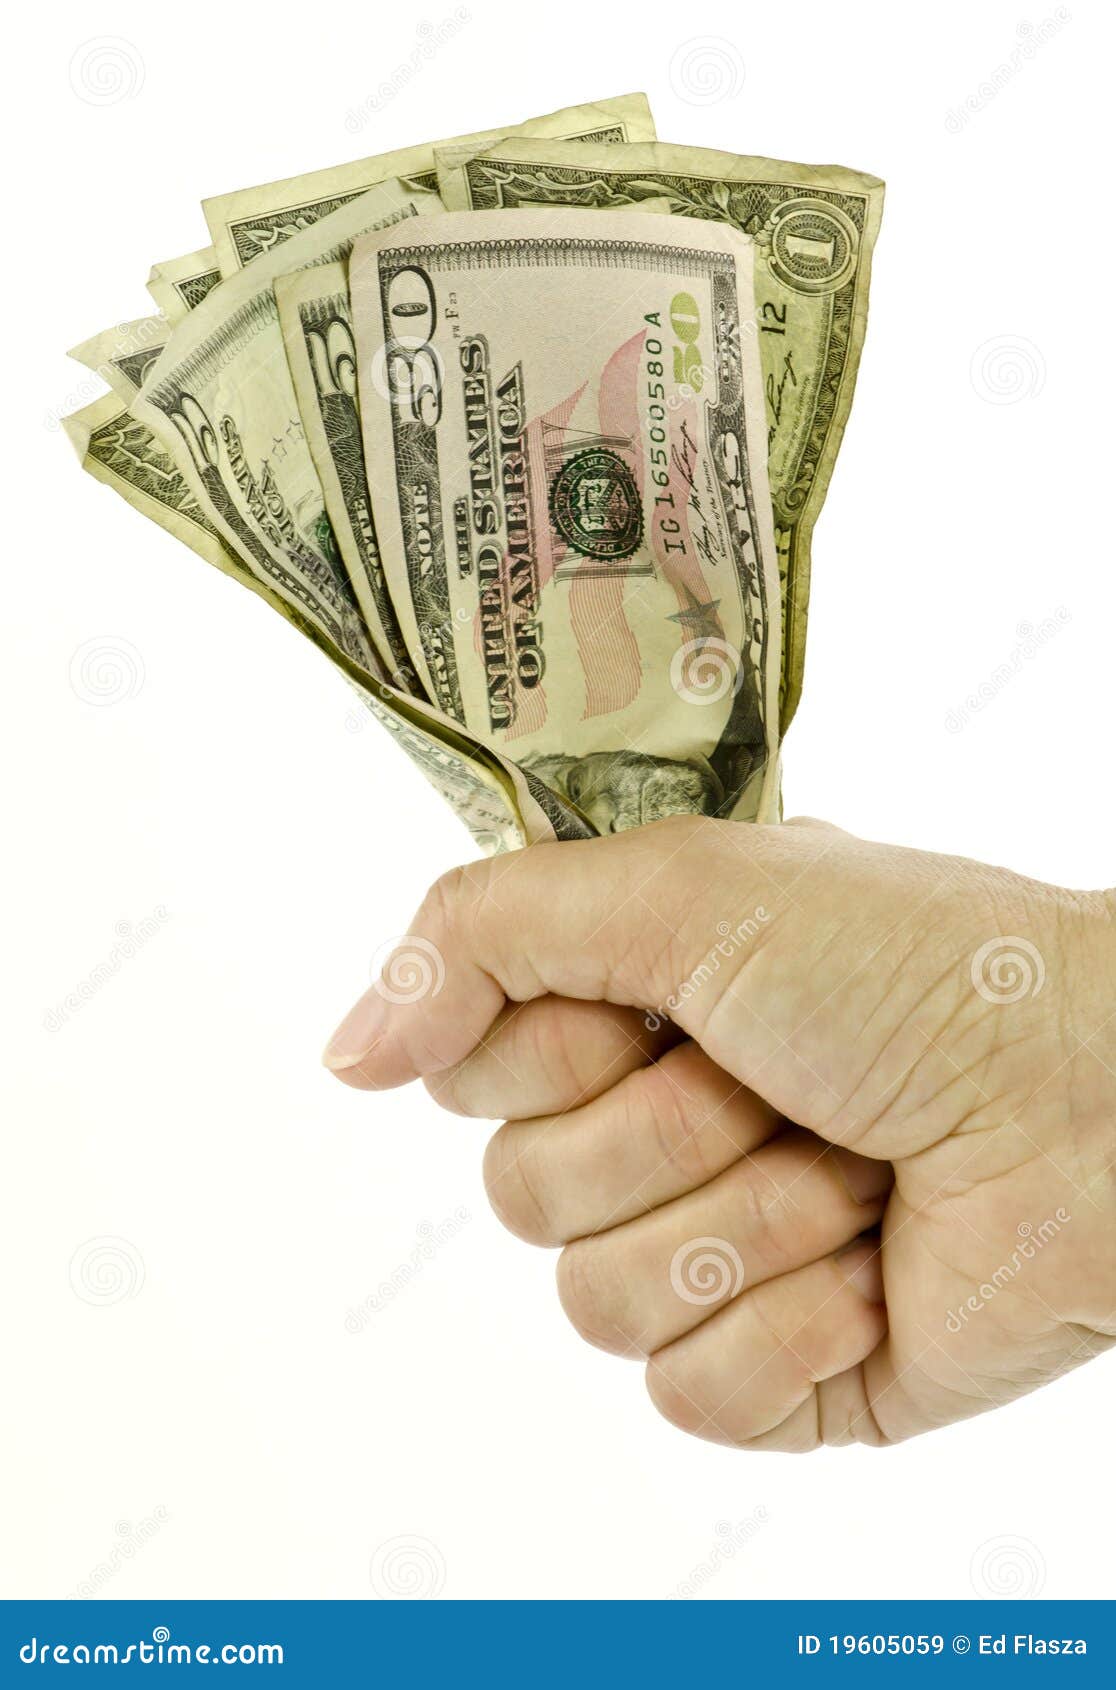 Handfull of money stock image. Image of rich, debt, greed - 19605059